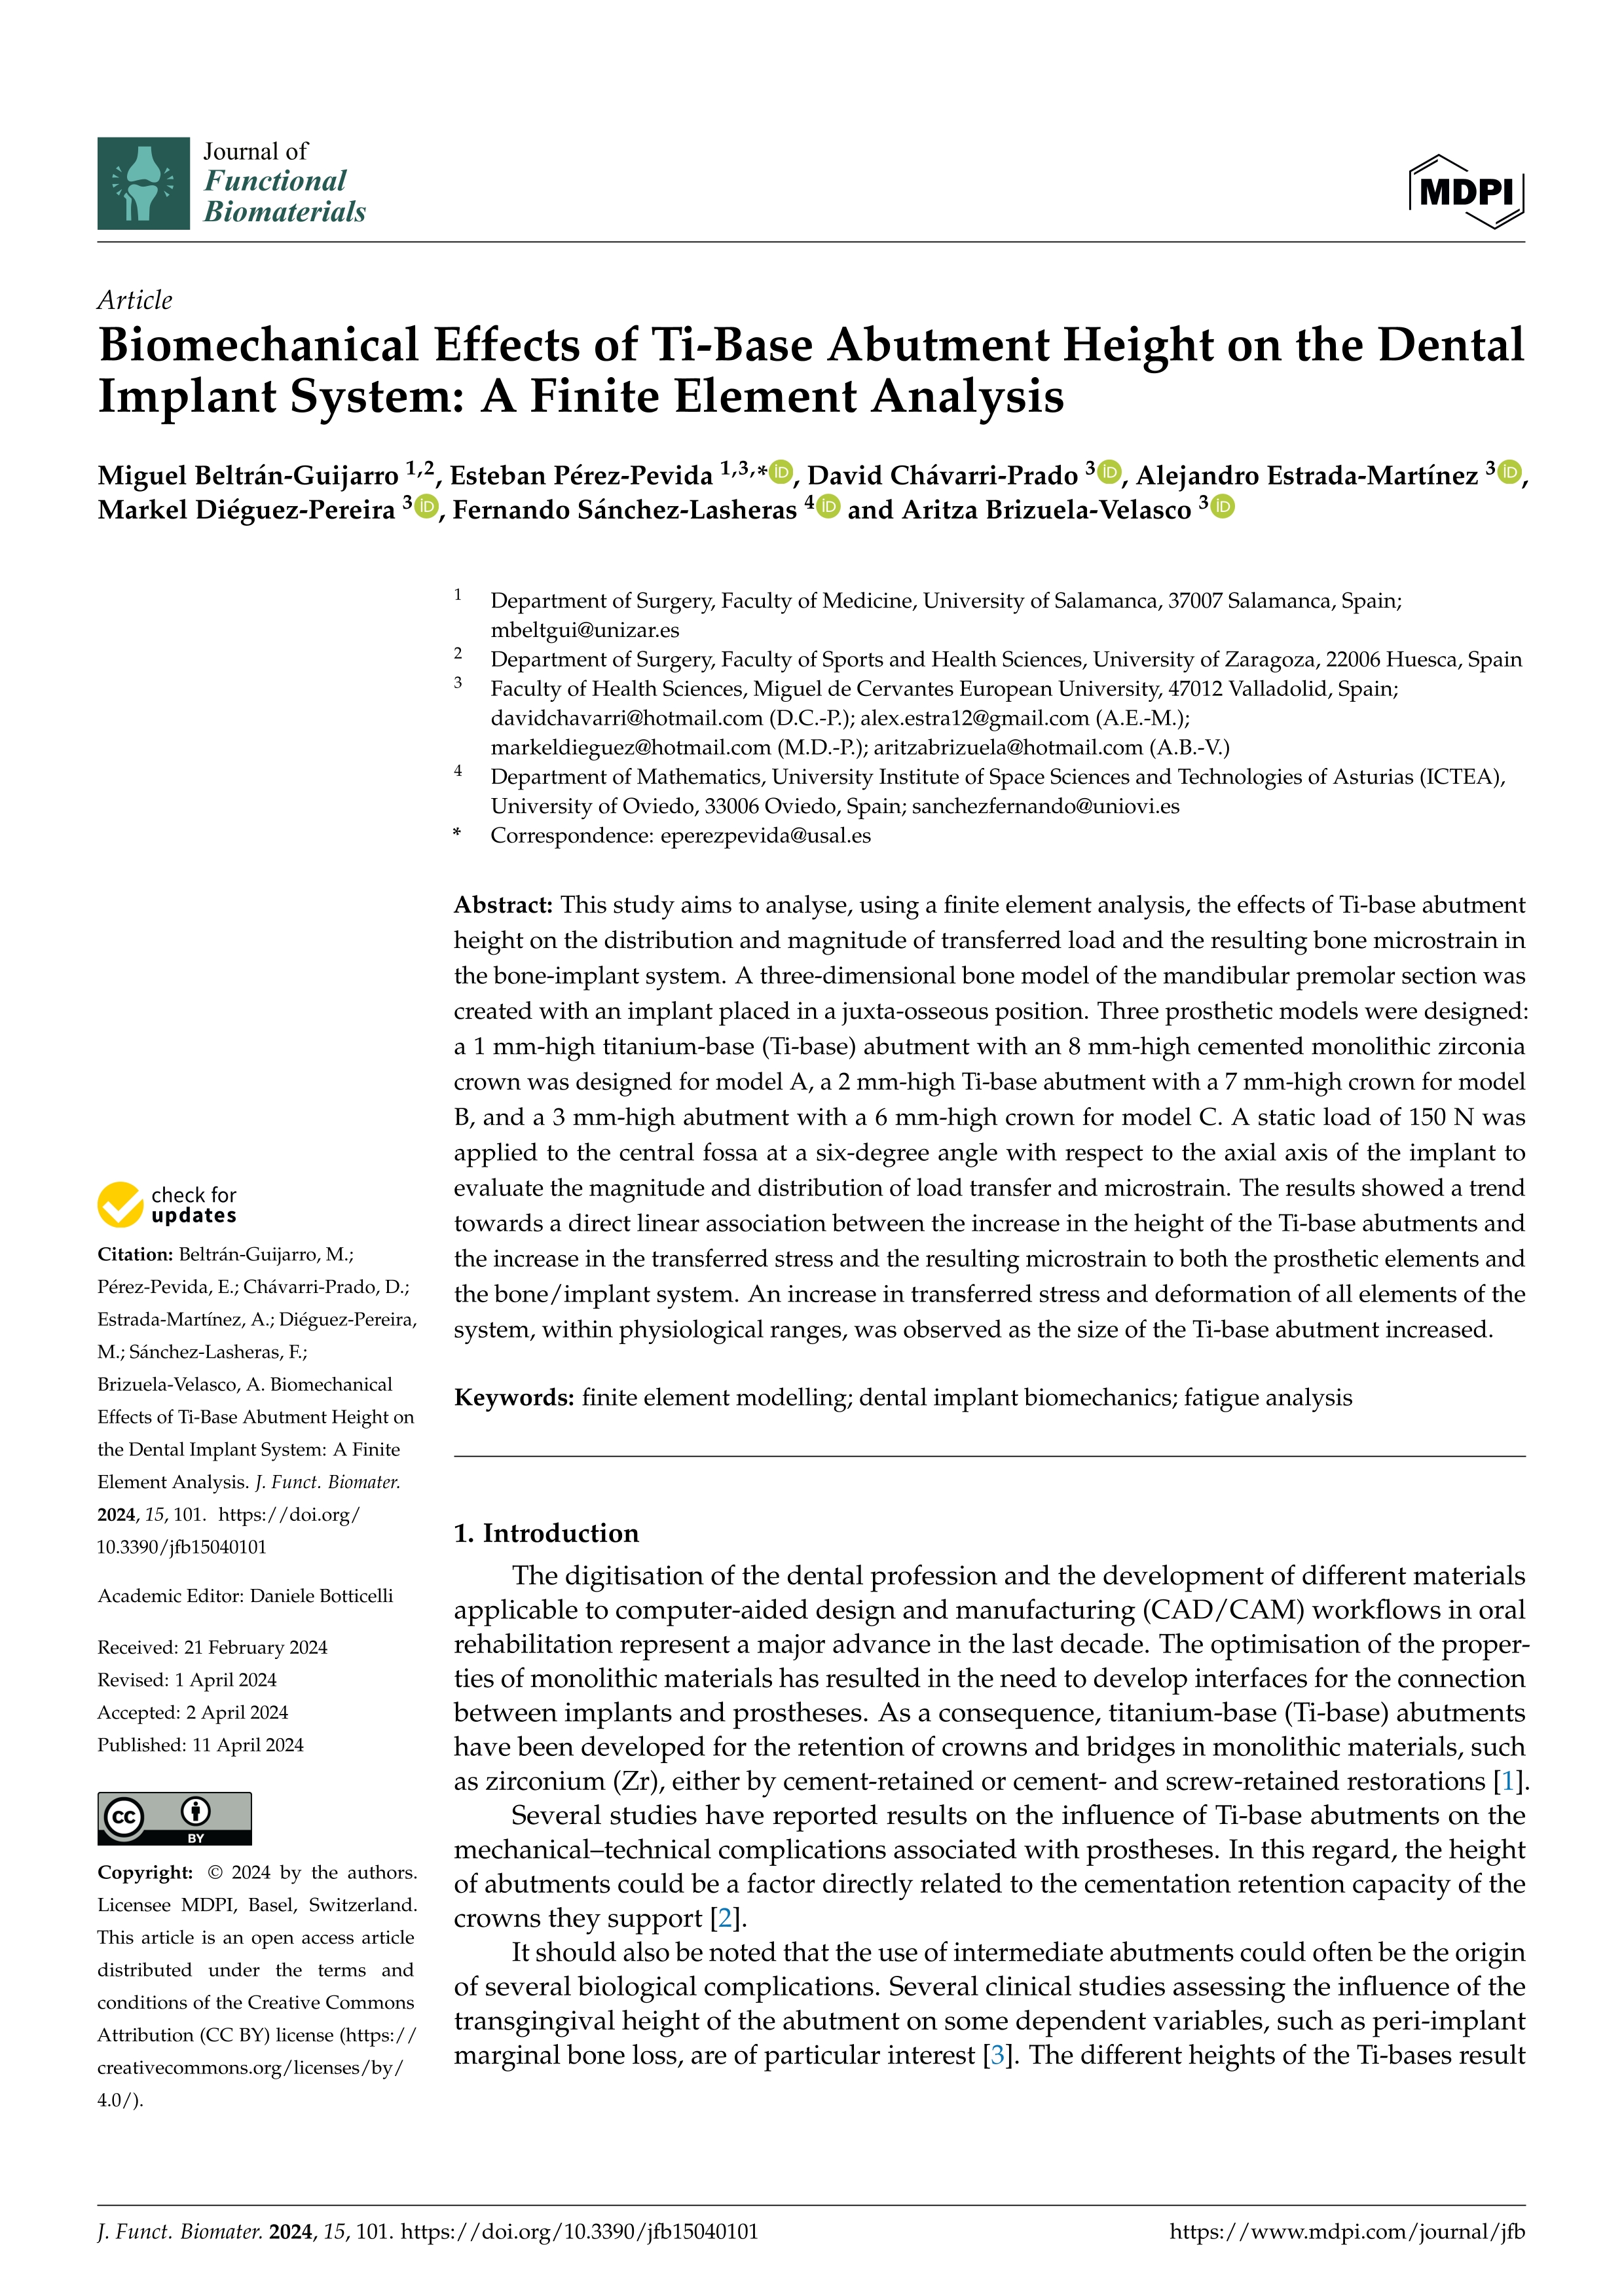 Biomechanical Effects of Ti-Base Abutment Height on the Dental Implant System: A Finite Element Analysis